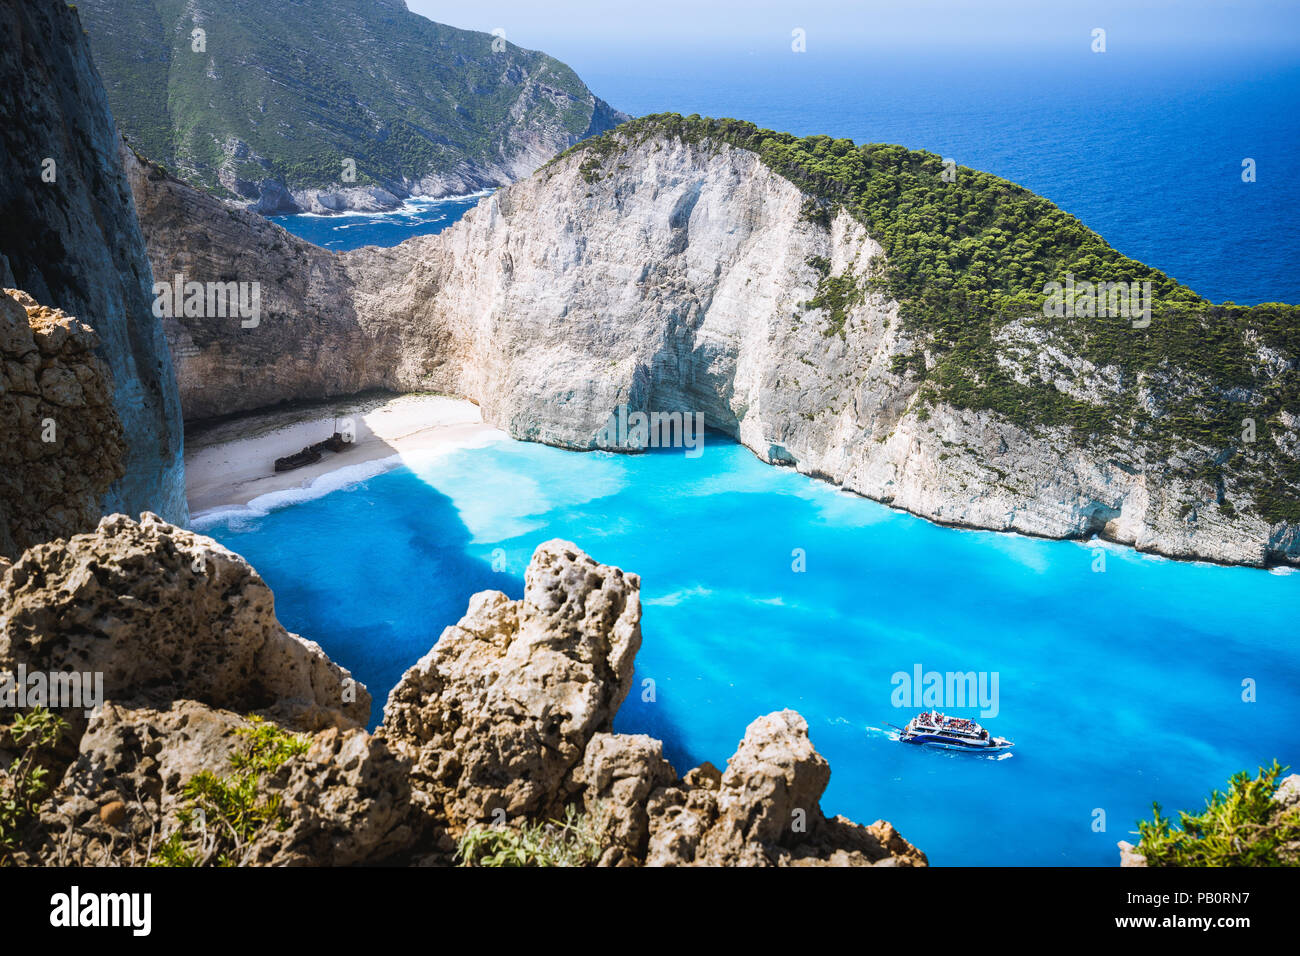 Navagio beach or Shipwreck bay with turquoise water and pebble white beach. Famous landmark location. Landscape of Zakynthos island, Greece Stock Photo